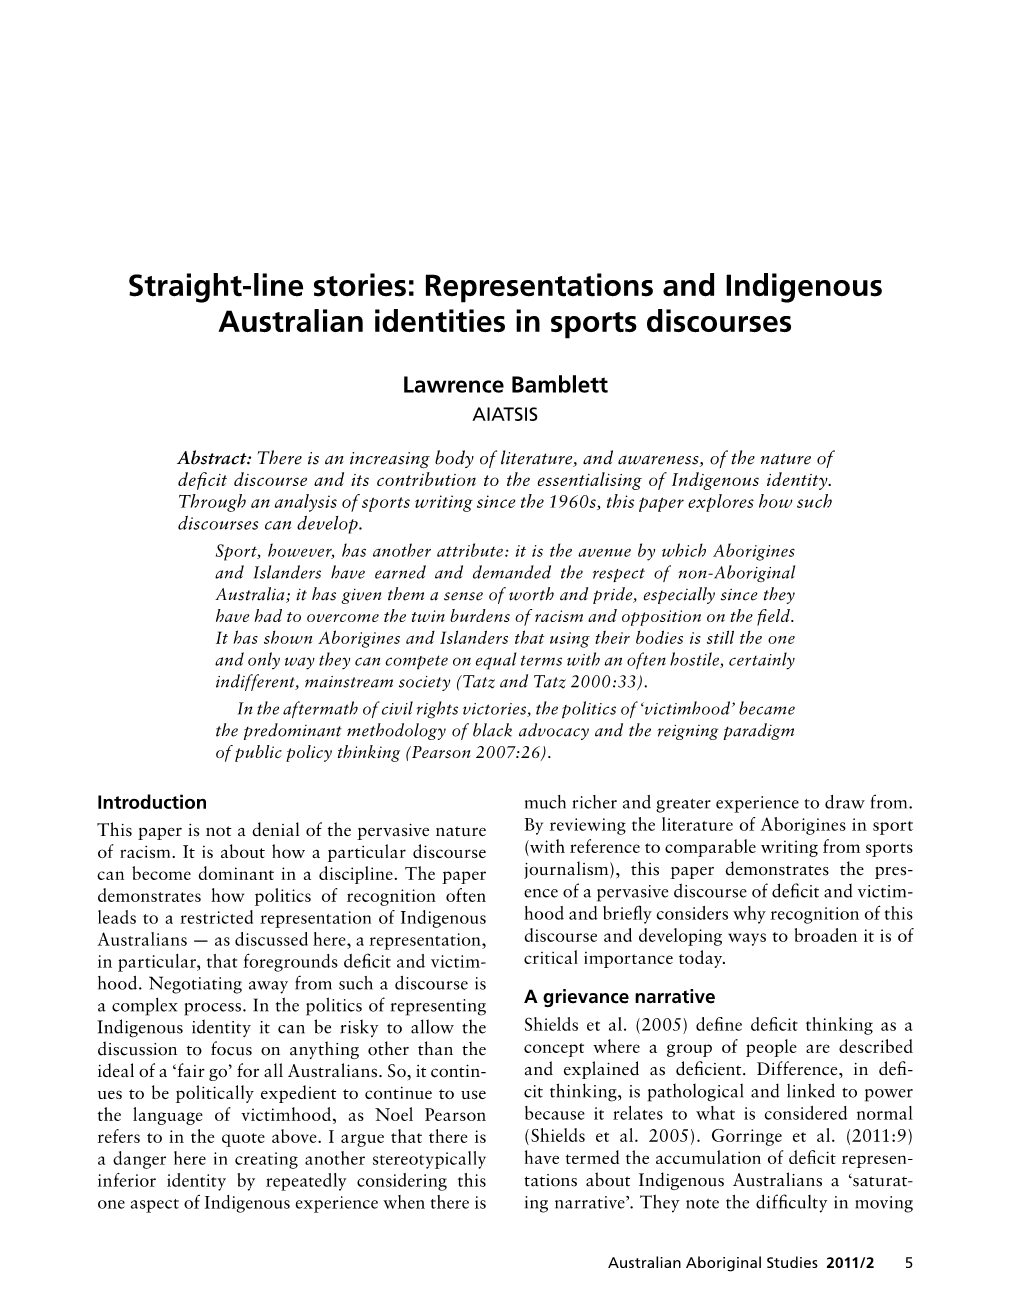 Straight-Line Stories: Representations and Indigenous Australian Identities in Sports Discourses